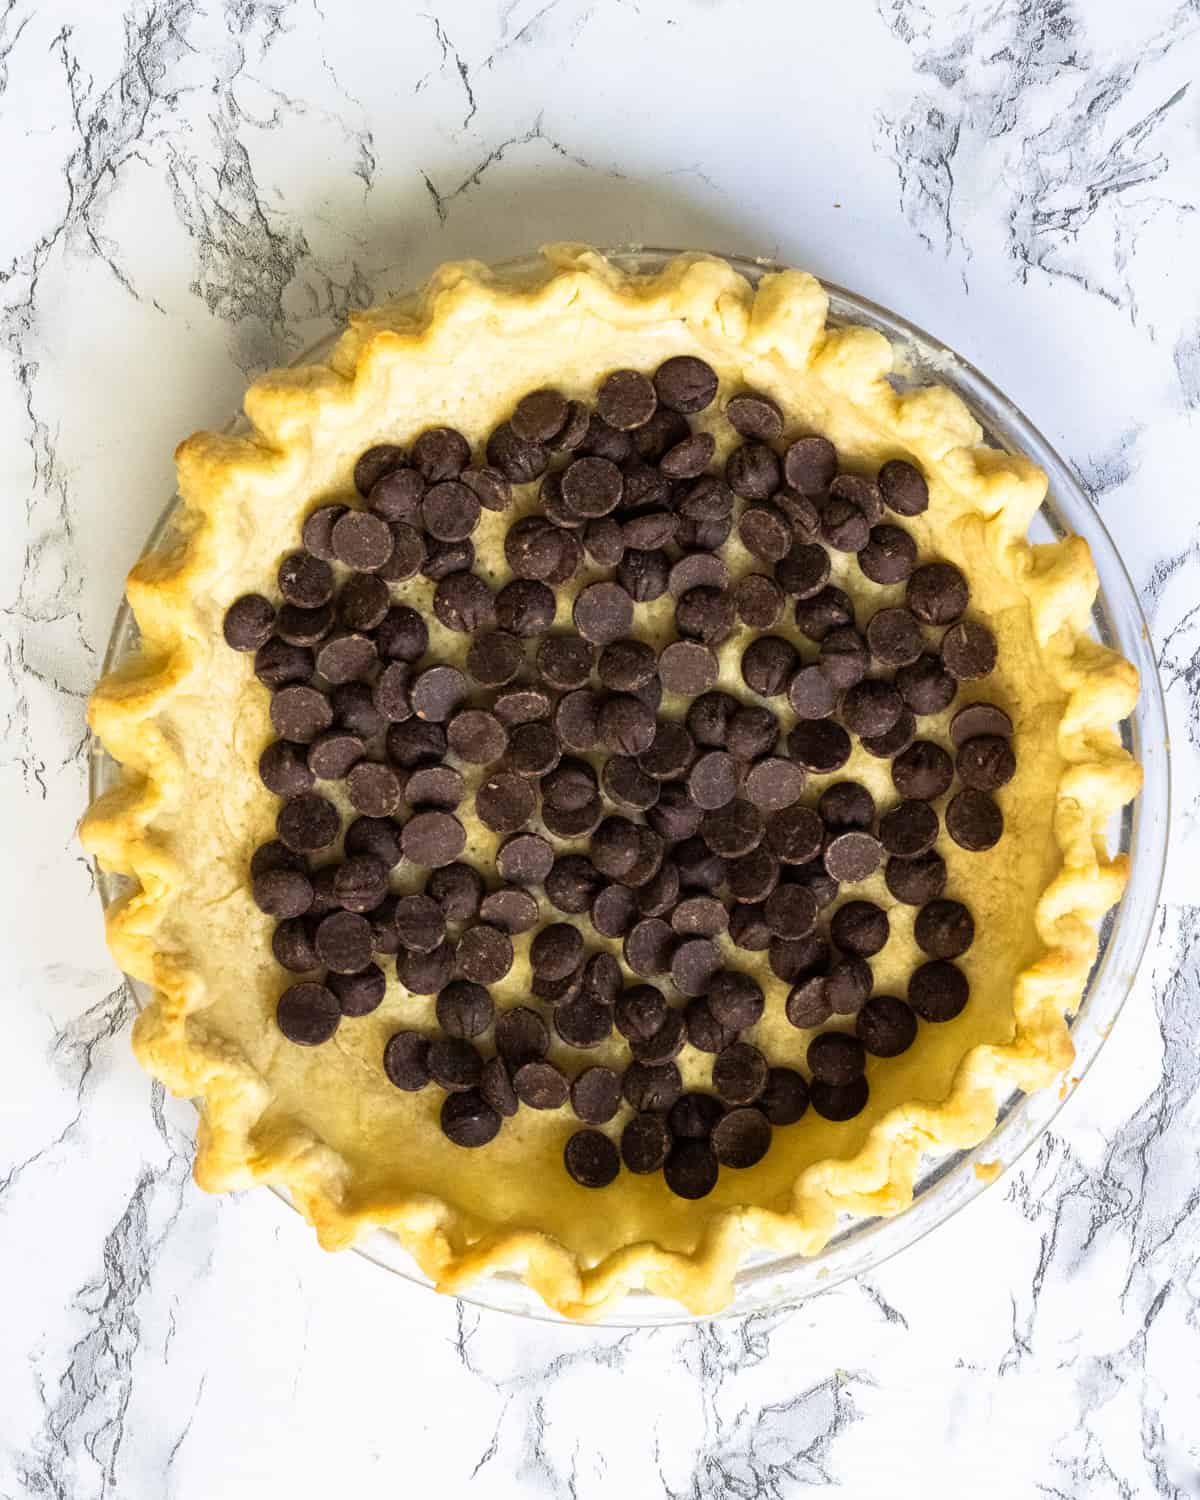 Overhead shot of a pie with a layer of chocolate chips inside.